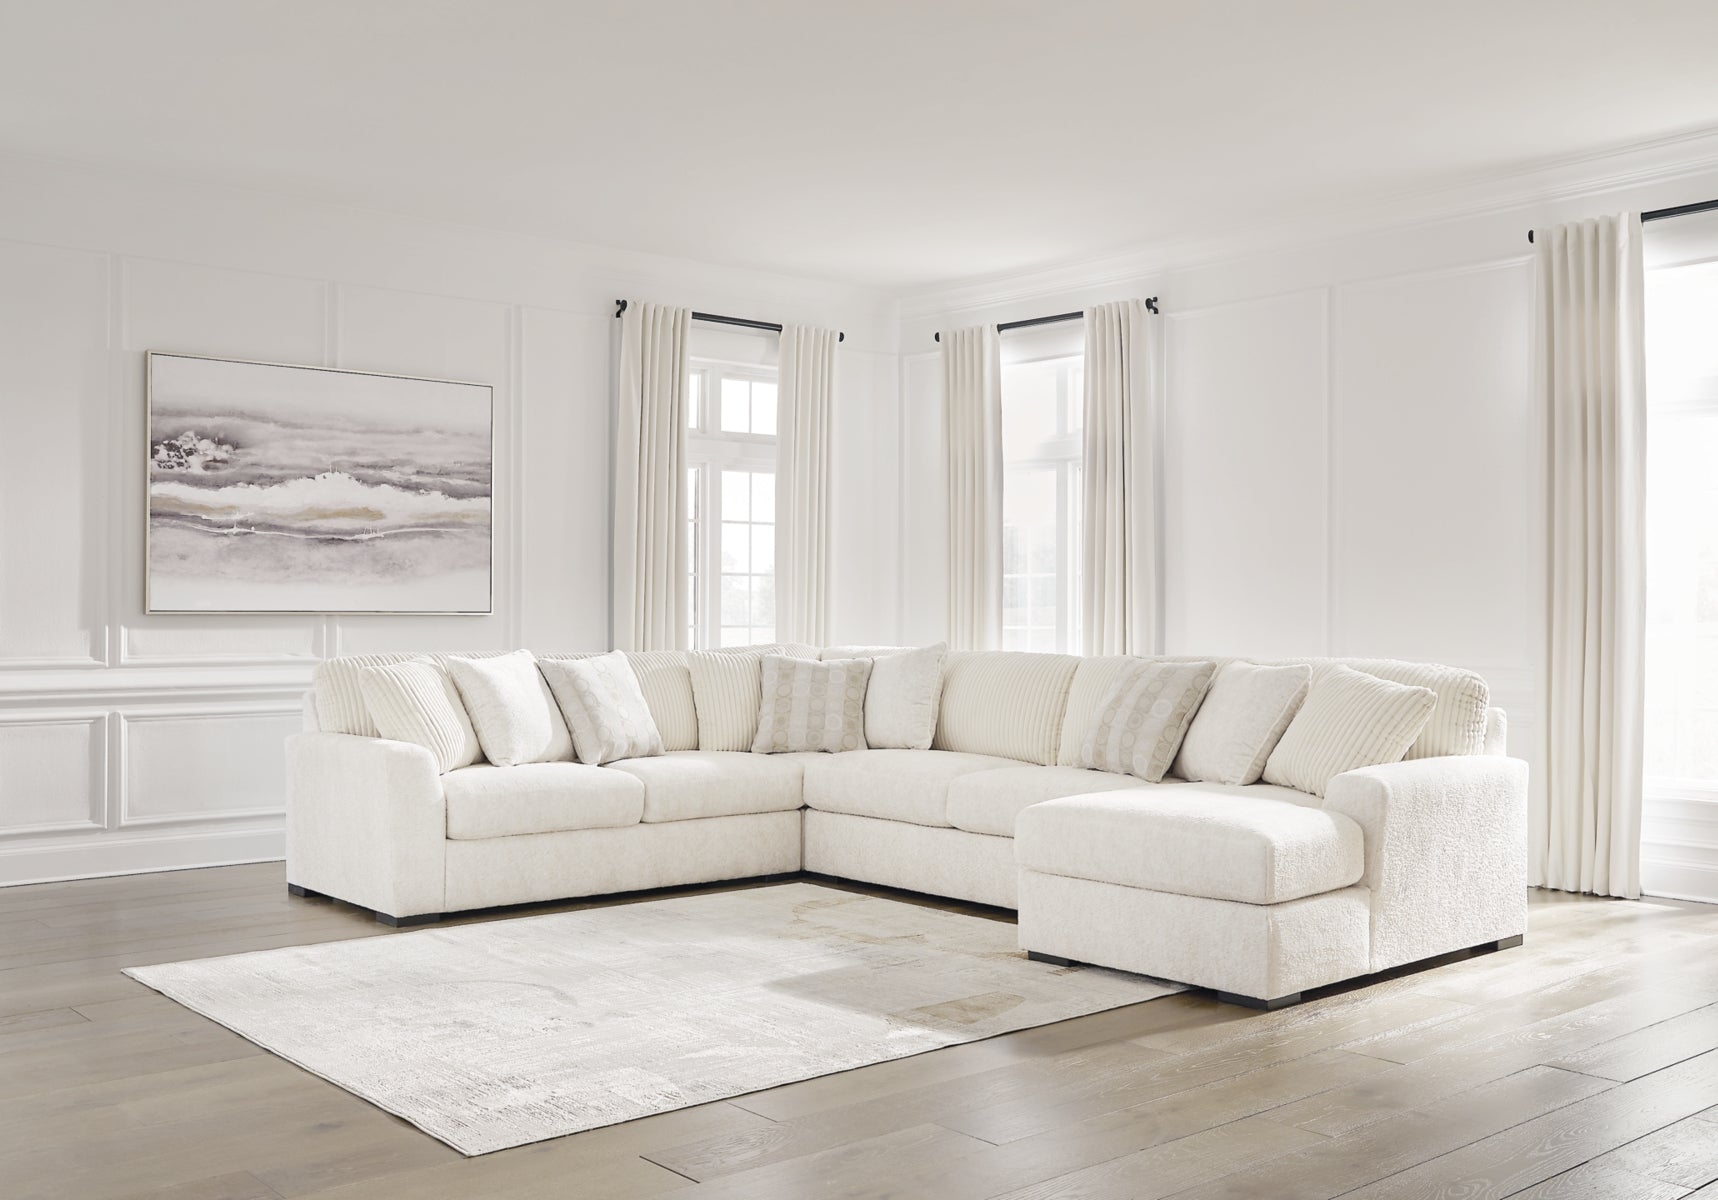 Chessington 4-Piece Sectional with Ottoman